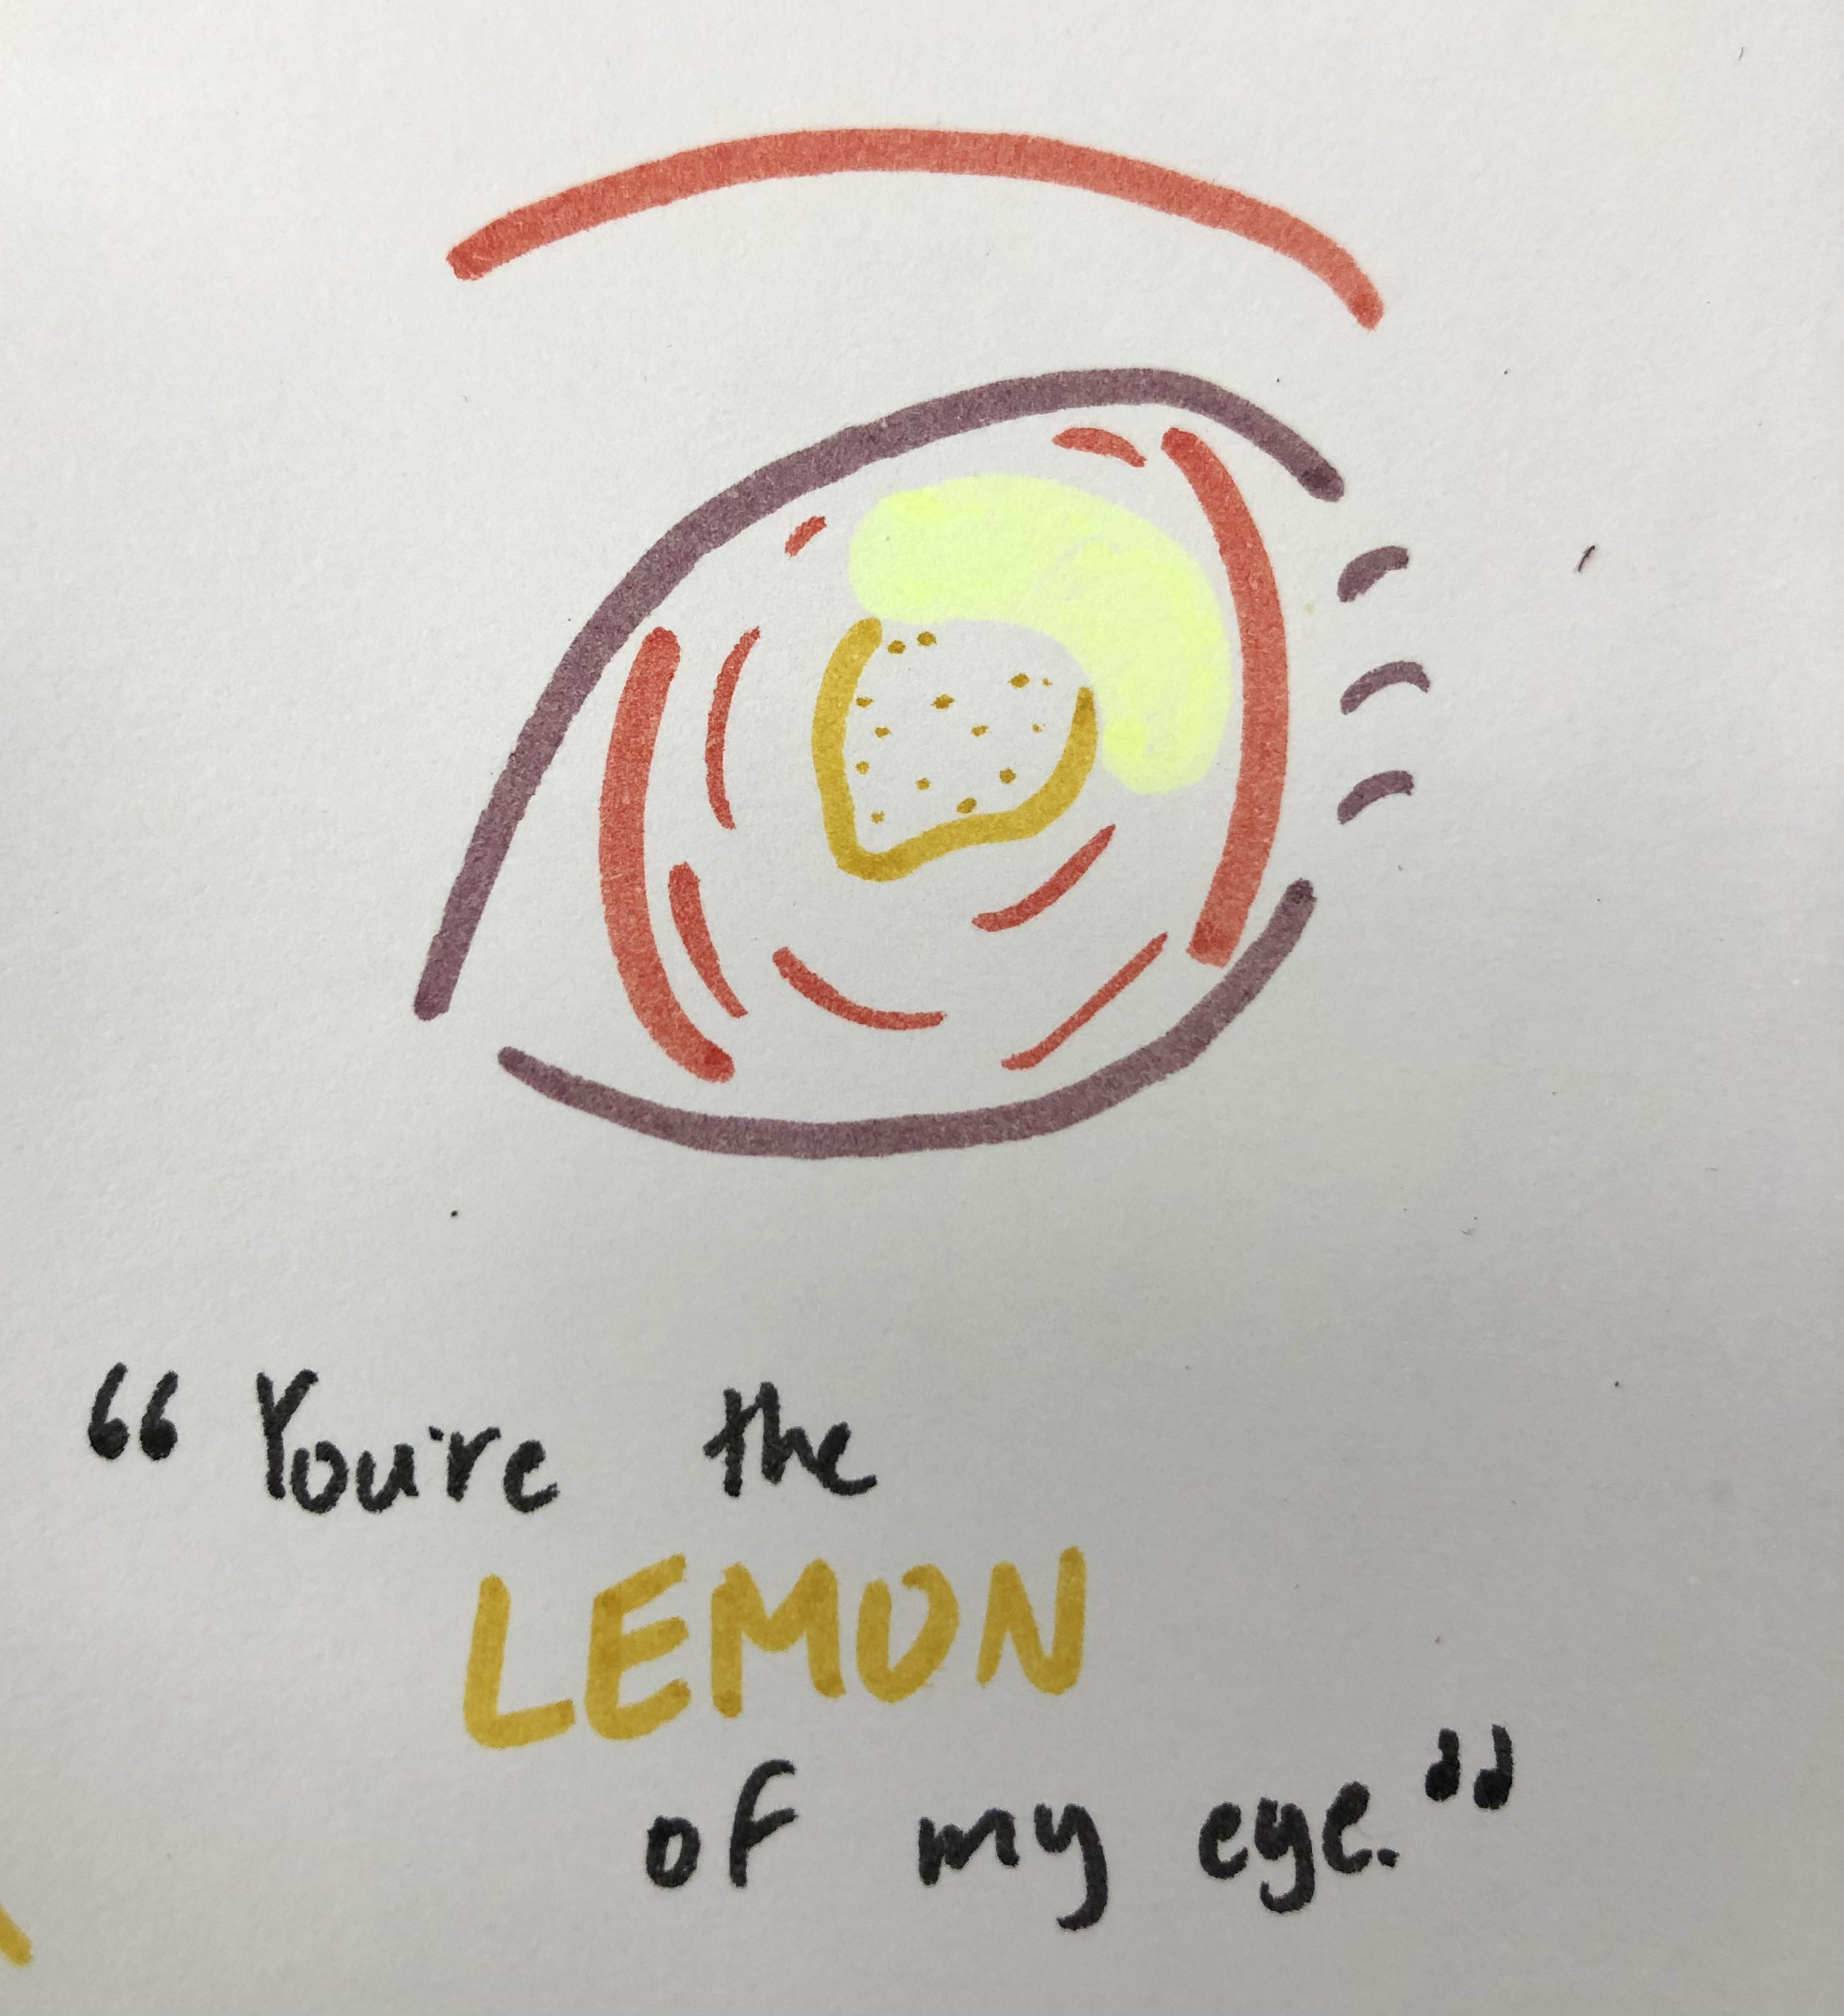 a marker sketch of a orange eye with a lemon in the center and a quote below 'You're the LEMON of my eye.'